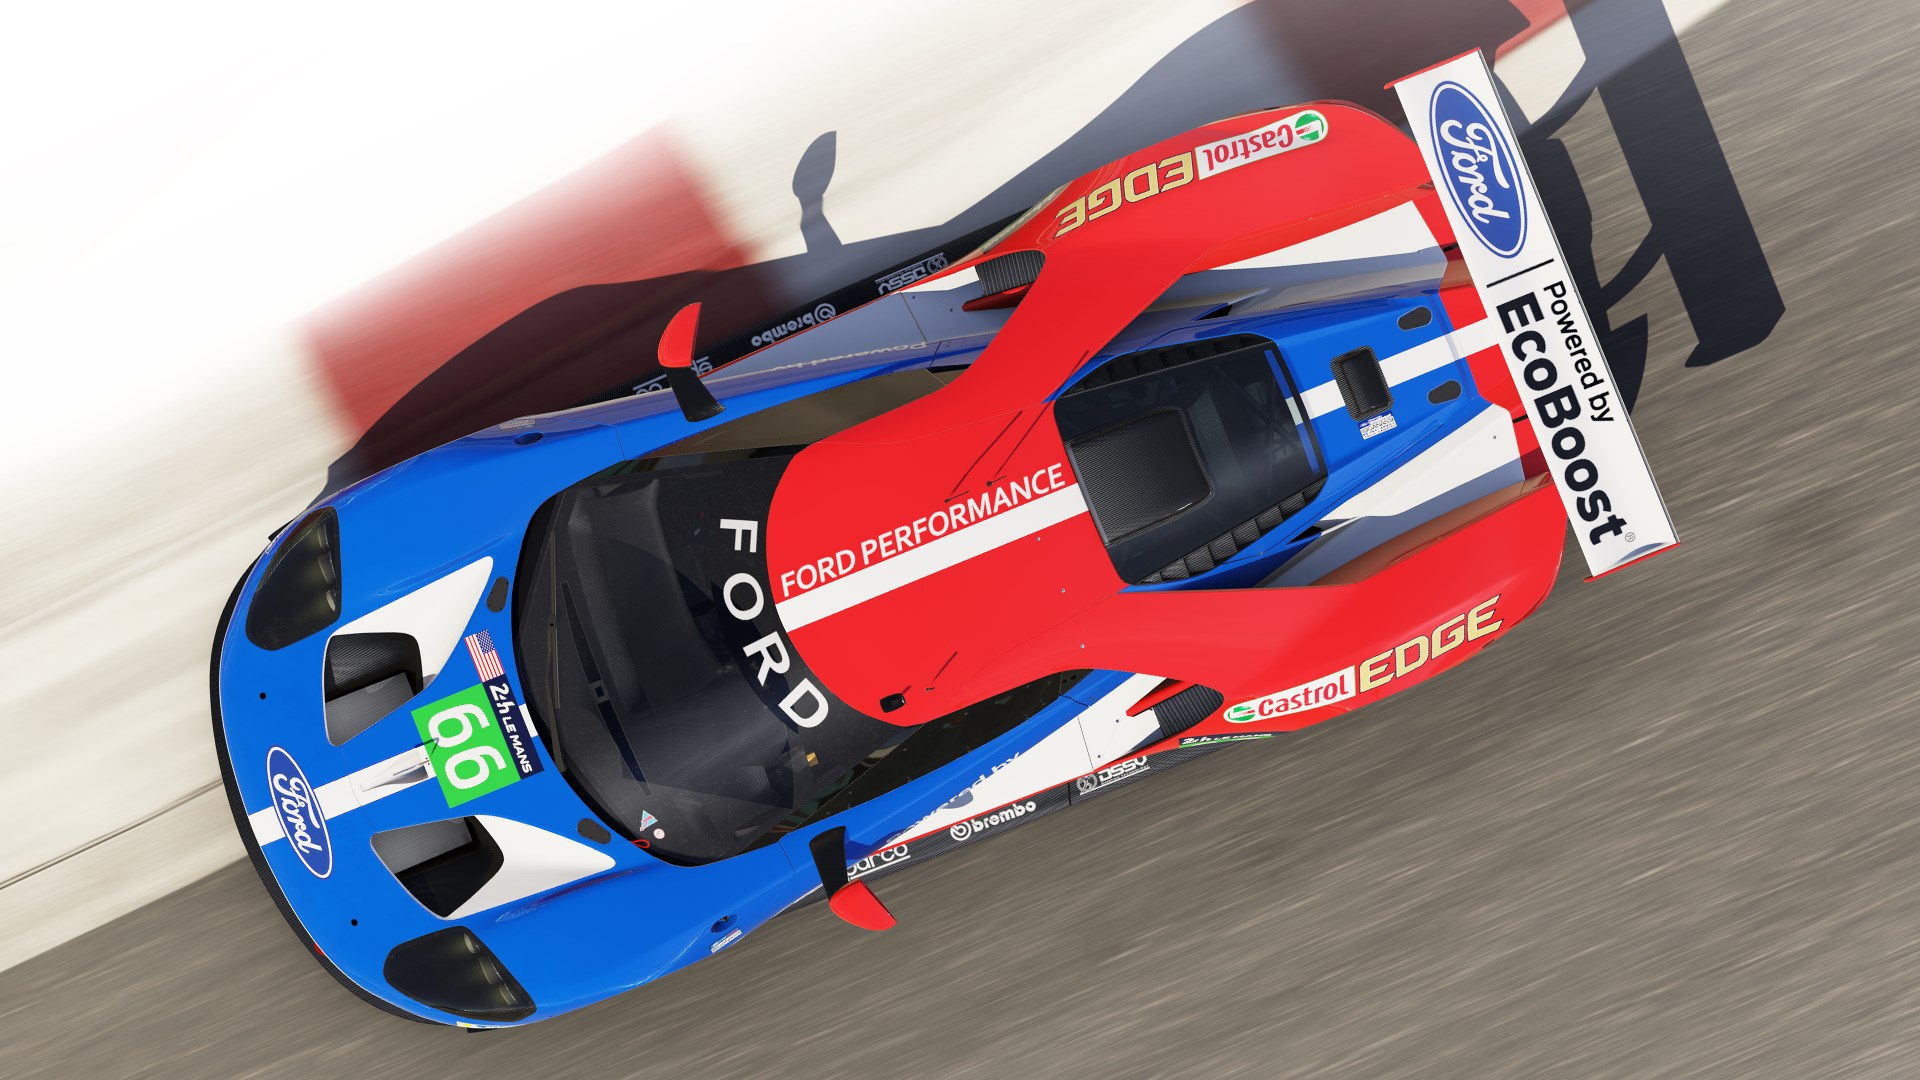 Download Forza Motorsport 6: Apex On Windows 10 For Free